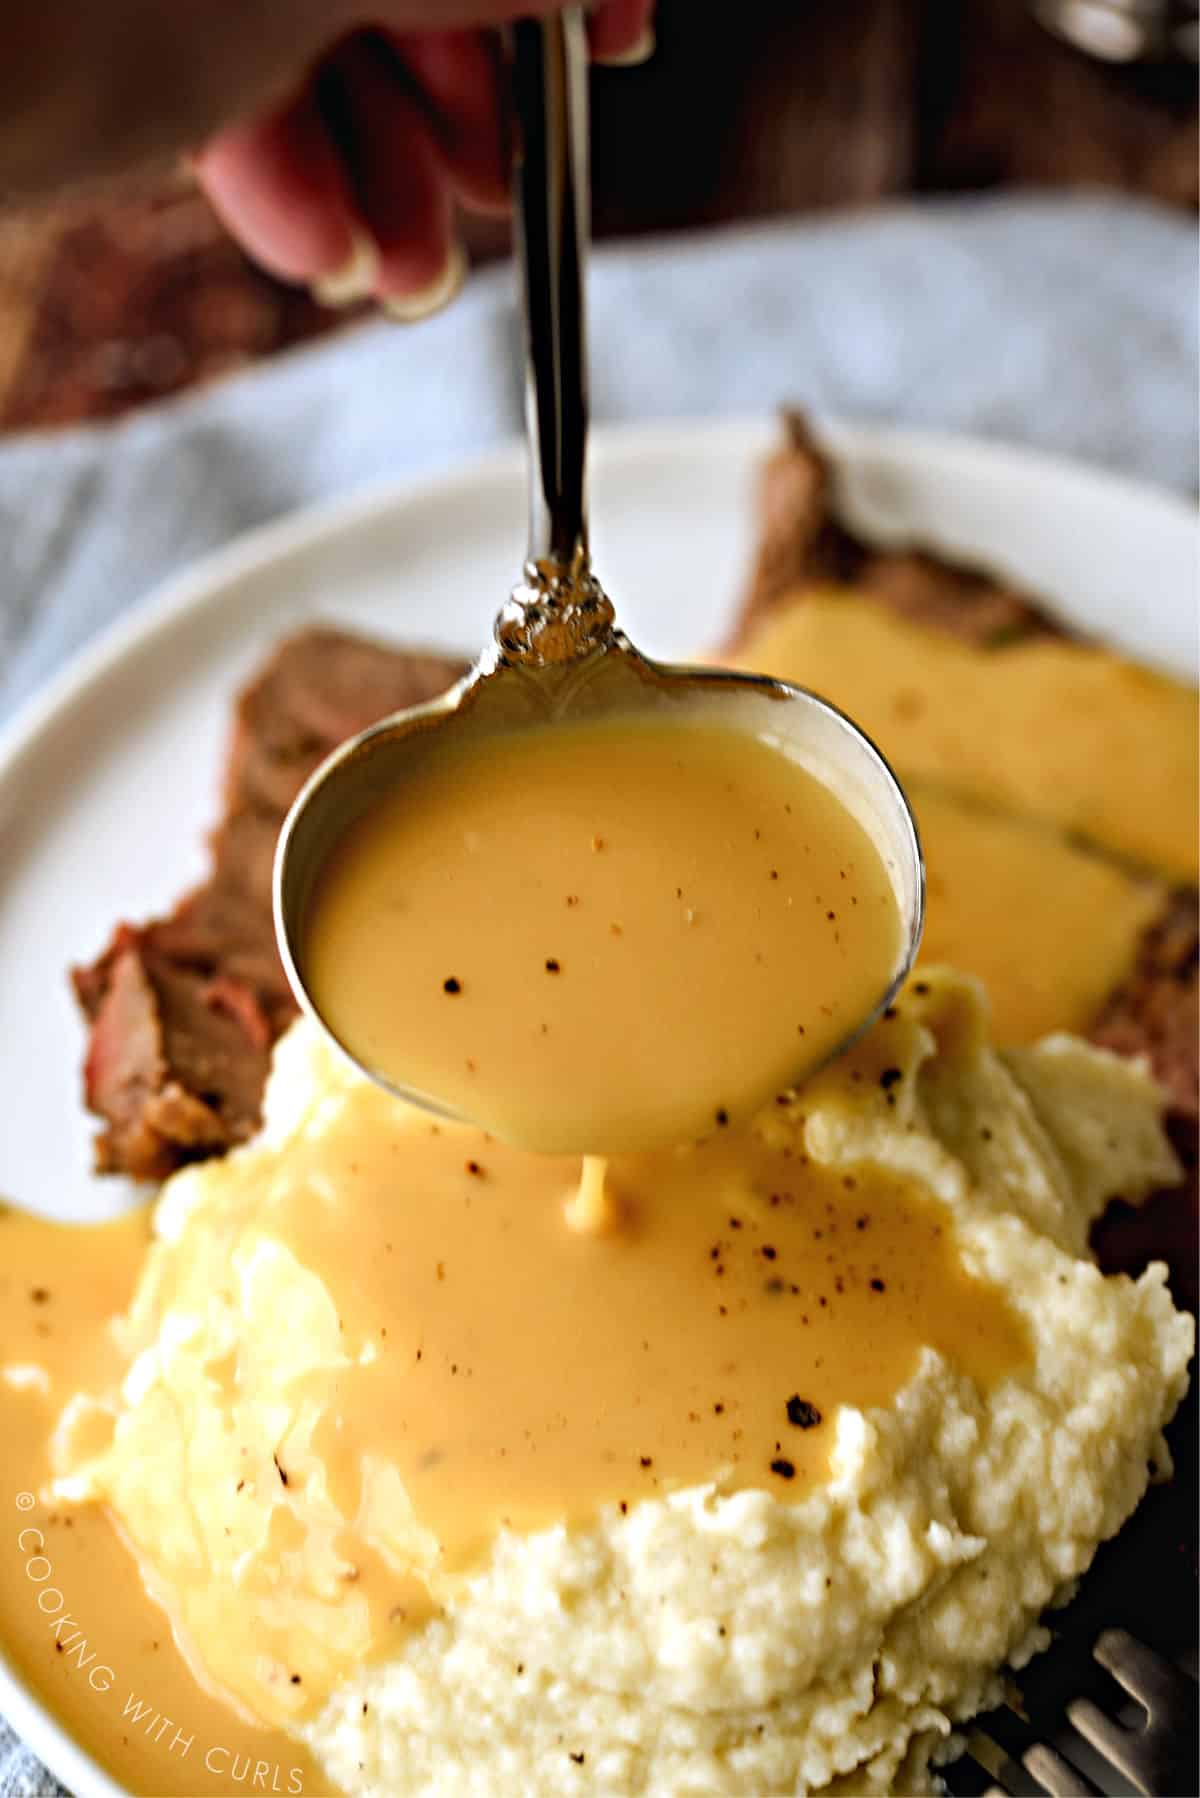 gravy being poured onto mashed cauliflower and slices of roast beef from a silver ladle.